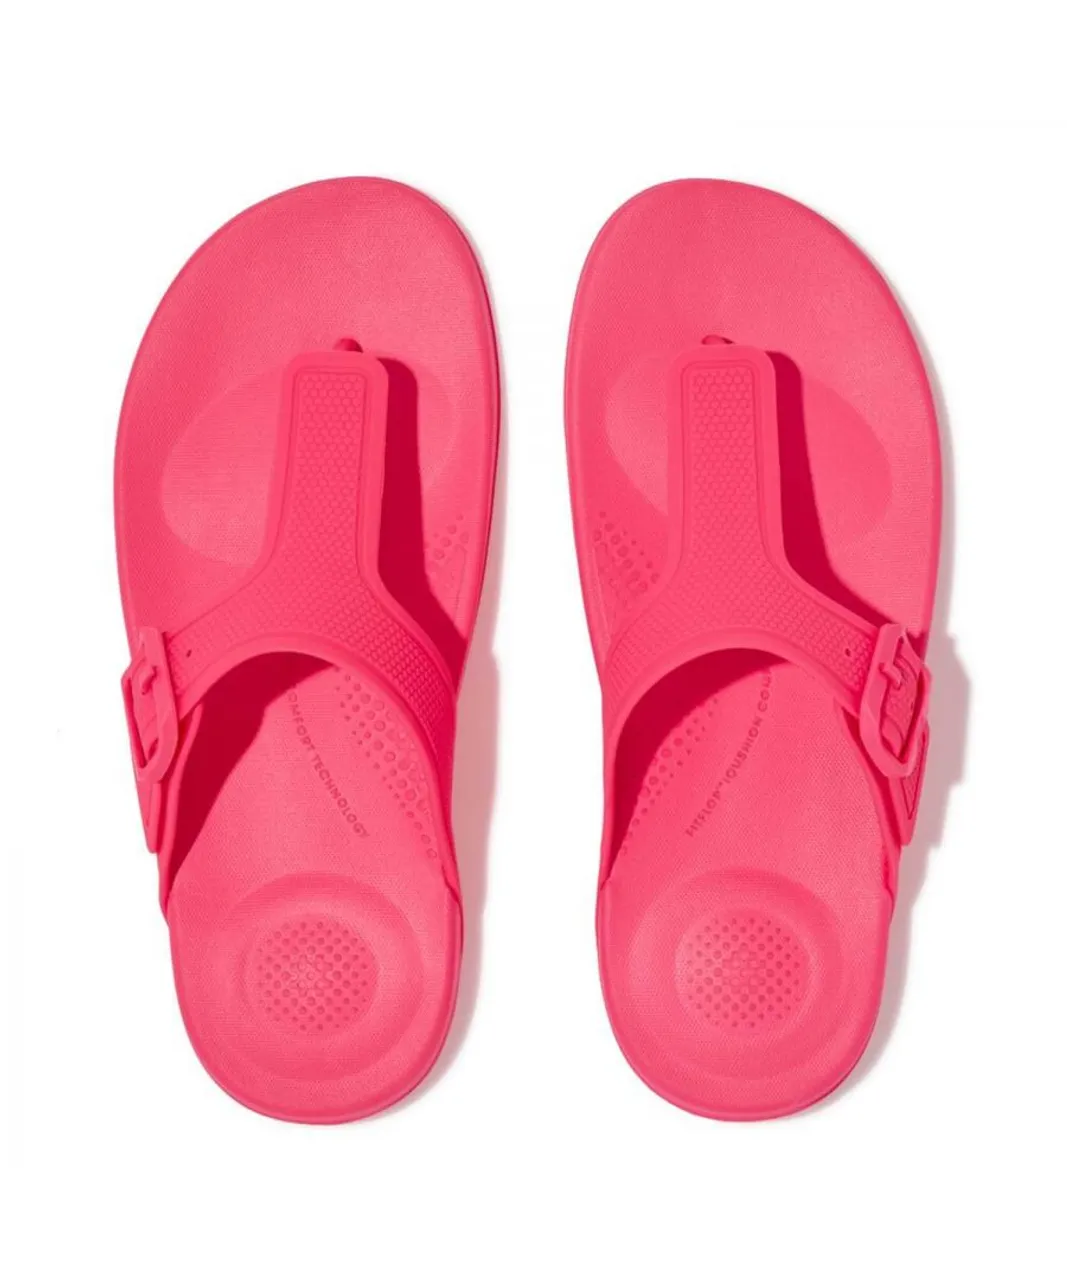 Fitflop Womenss Fit Flop iQushion Adjustable Buckle Flip-Flops in Pink Rubber